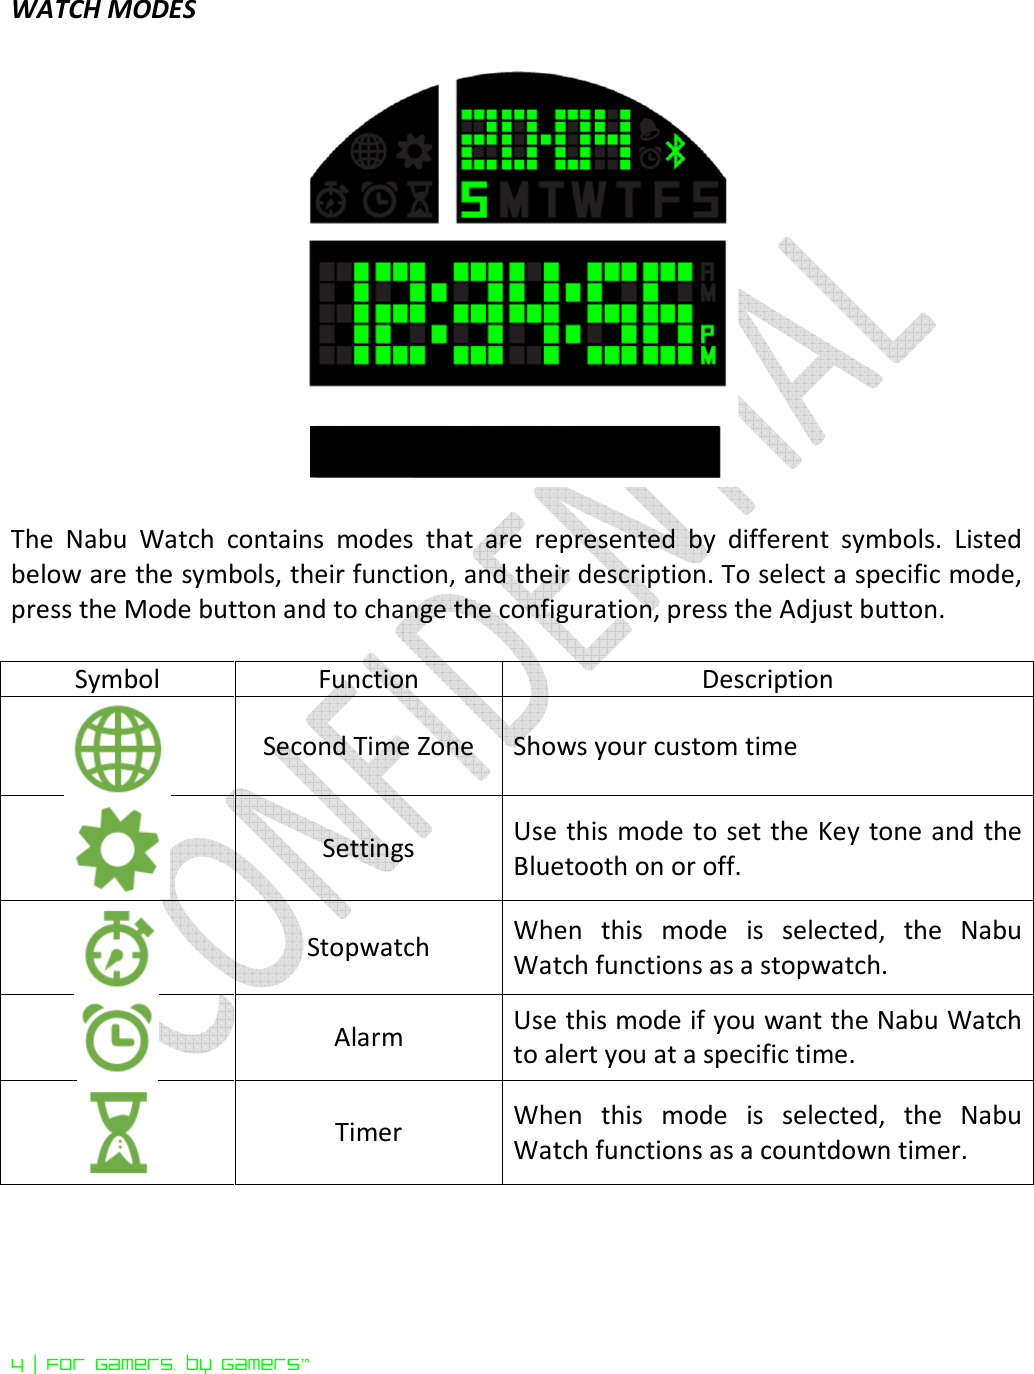  4 | For gamers. by gamers™  WATCH MODES    The  Nabu  Watch  contains  modes  that  are  represented  by  different  symbols.  Listed below are the symbols, their function, and their description. To select a specific mode, press the Mode button and to change the configuration, press the Adjust button.    Symbol Function Description  Second Time Zone  Shows your custom time  Settings  Use this mode to set the Key tone and the Bluetooth on or off.  Stopwatch   When  this  mode  is  selected,  the  Nabu Watch functions as a stopwatch.   Alarm  Use this mode if you want the Nabu Watch to alert you at a specific time.   Timer  When  this  mode  is  selected,  the  Nabu Watch functions as a countdown timer.      